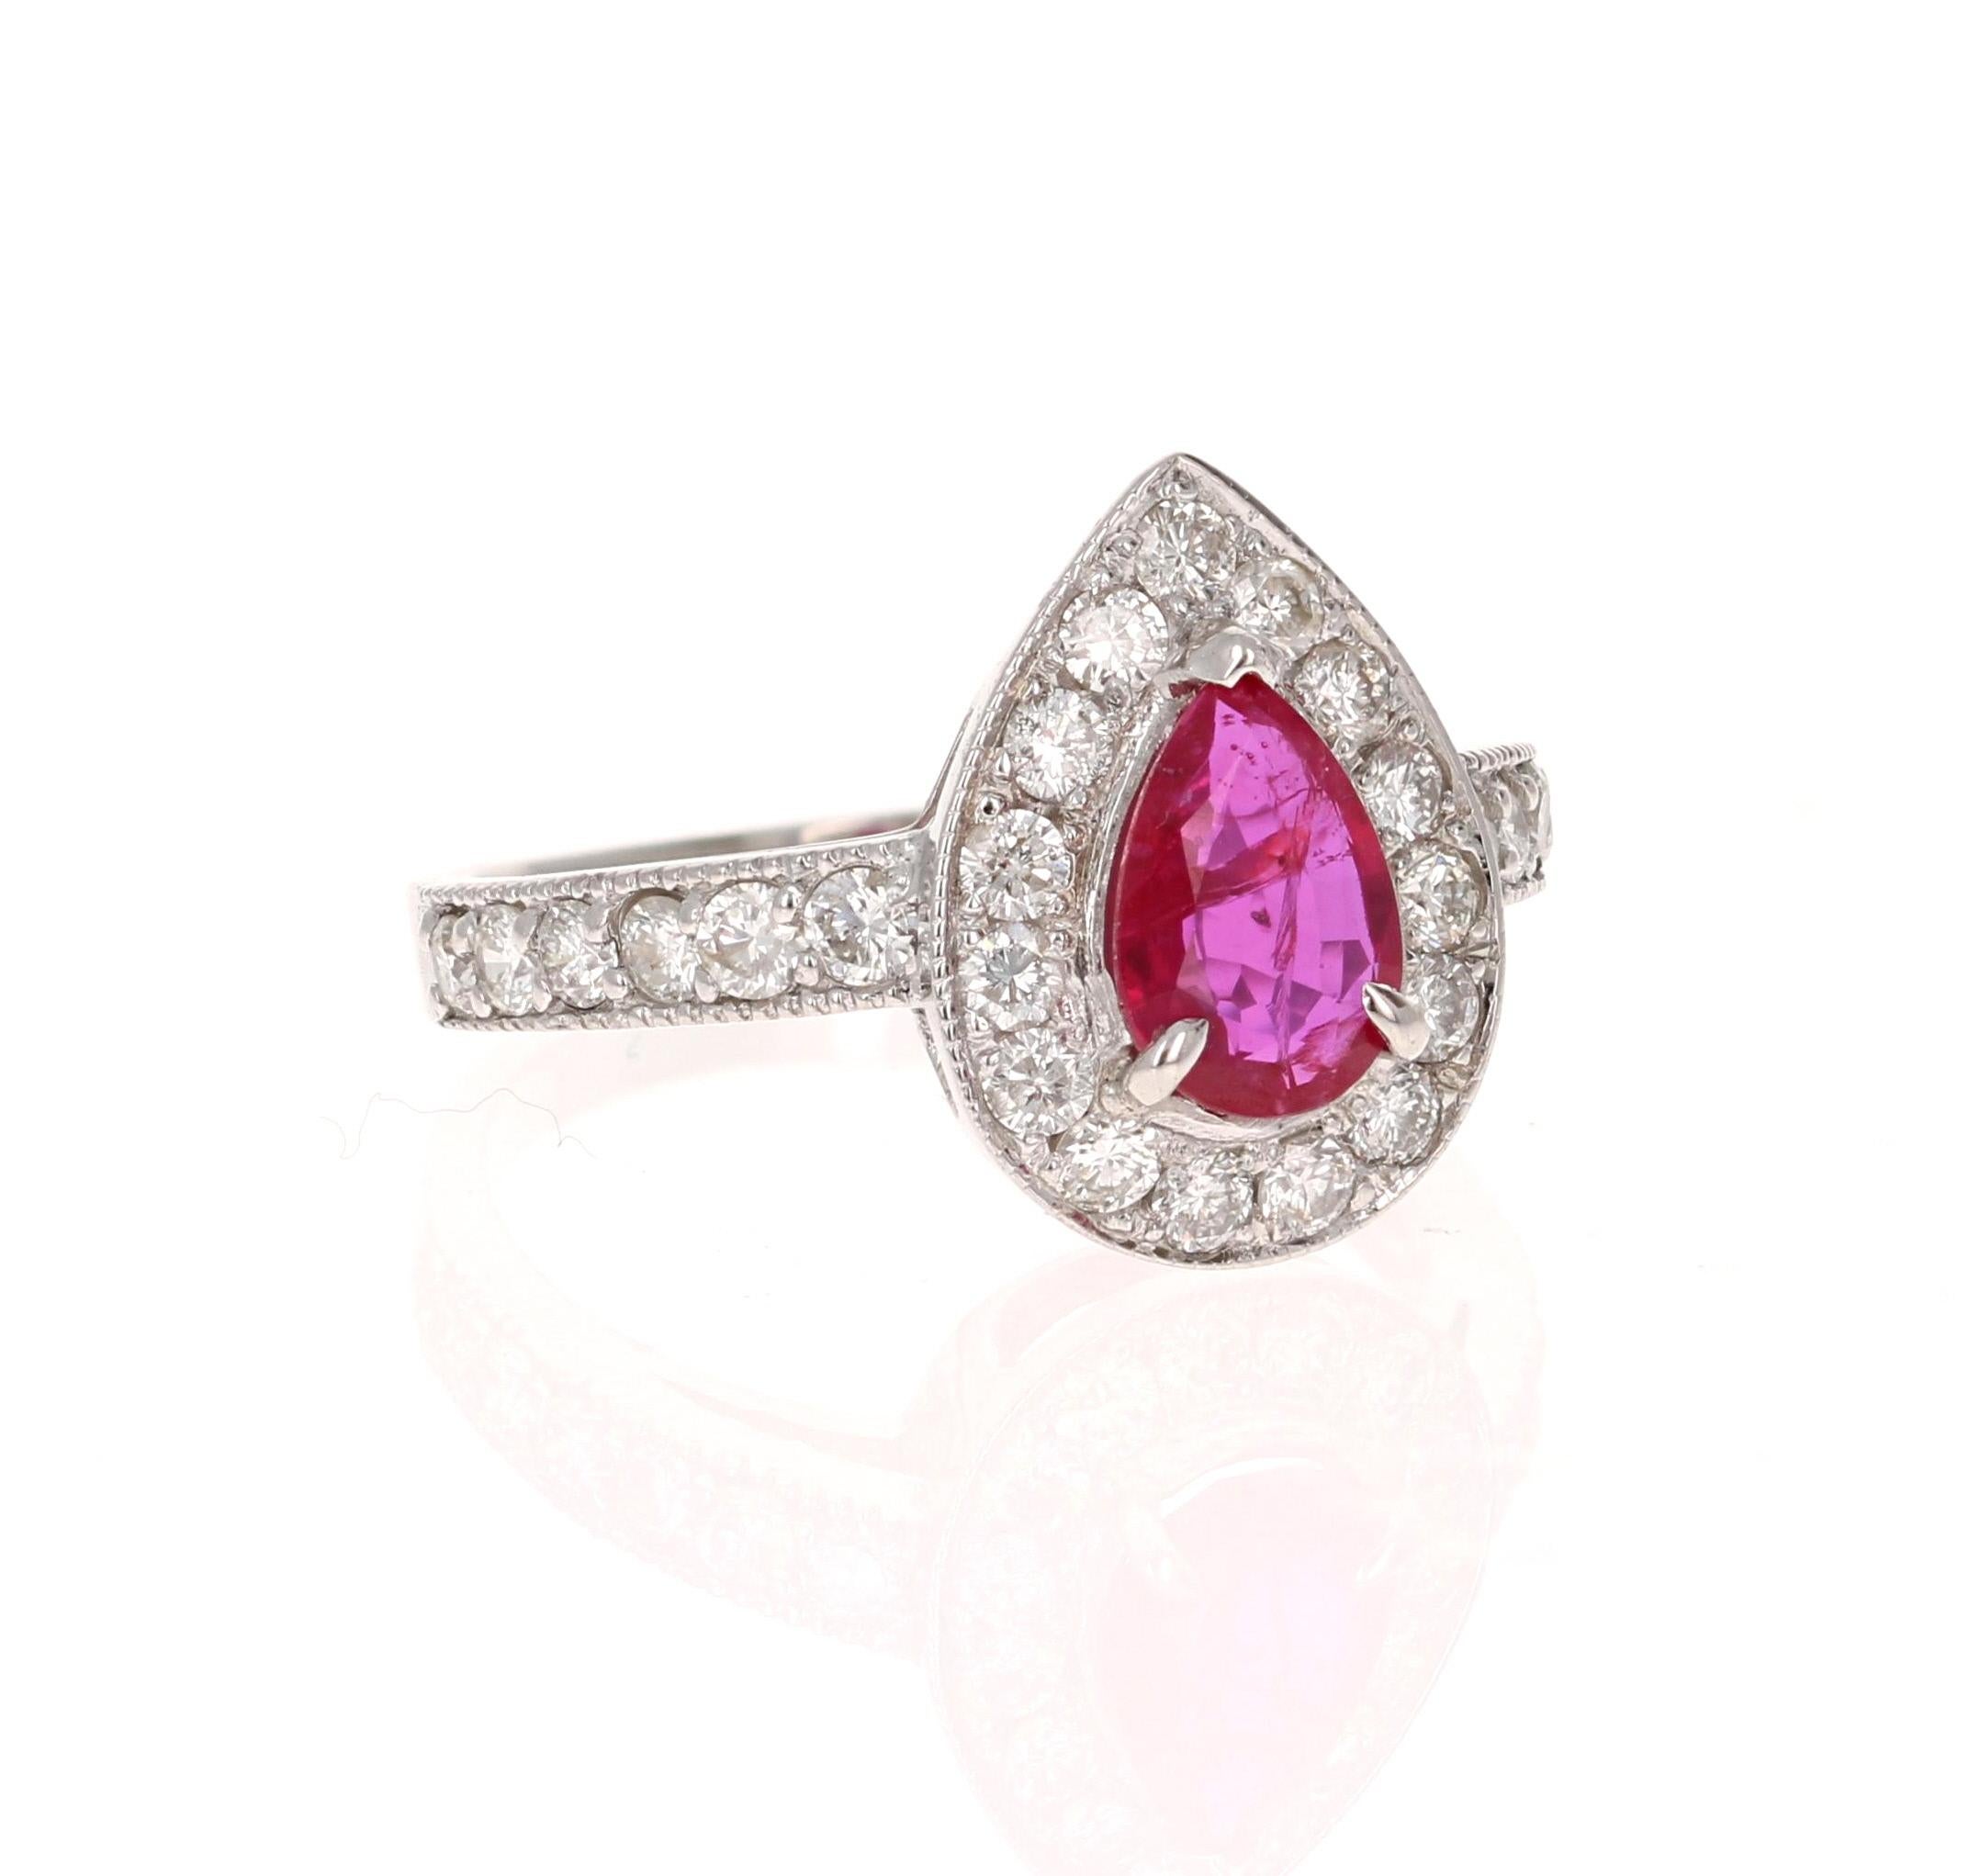 Contemporary GIA Certified 2.12 Carat Ruby Diamond 18 Karat White Gold Engagement Ring For Sale